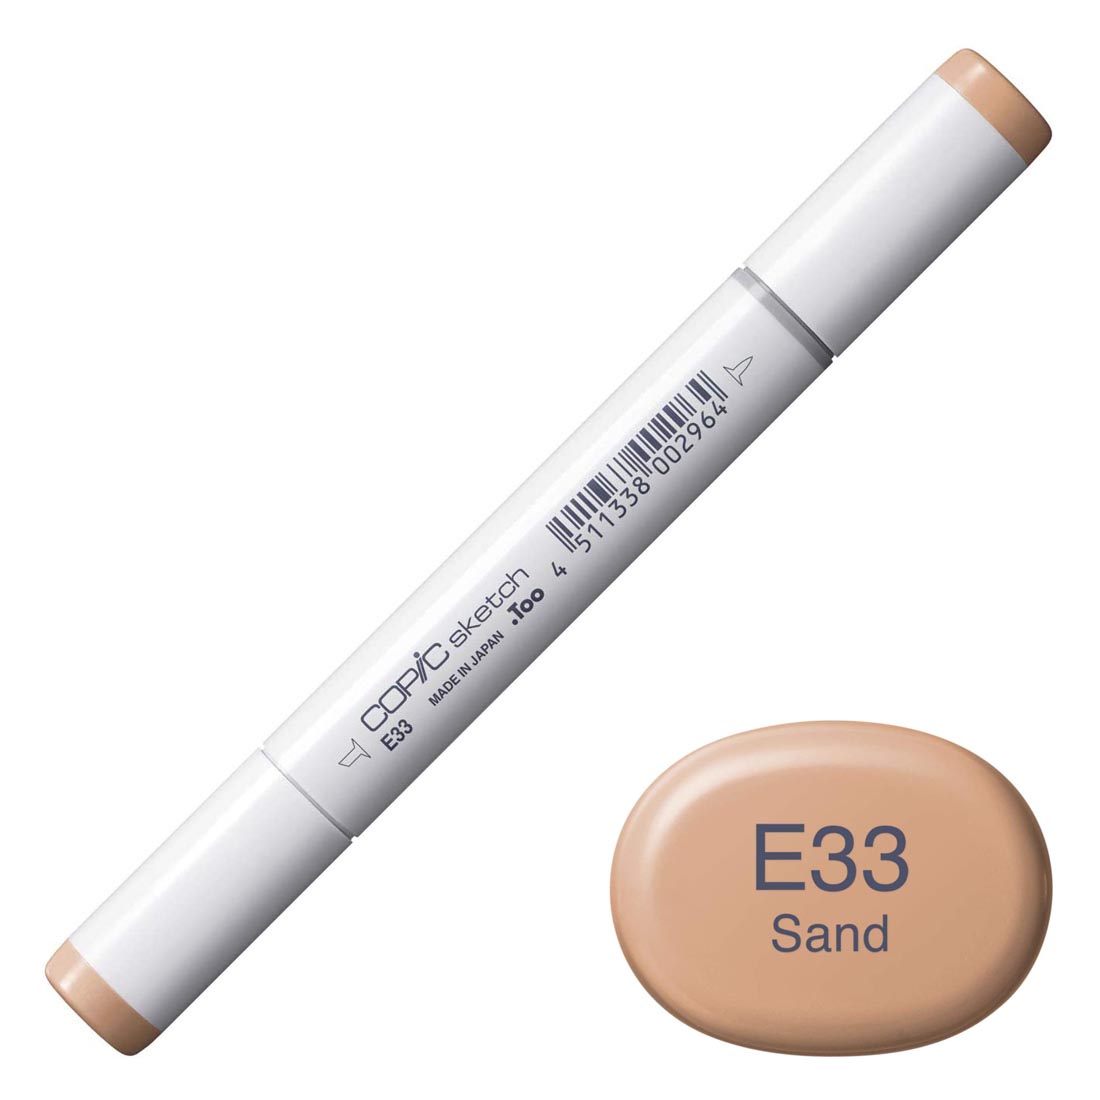 COPIC Sketch Marker with a color swatch and text of E33 Sand